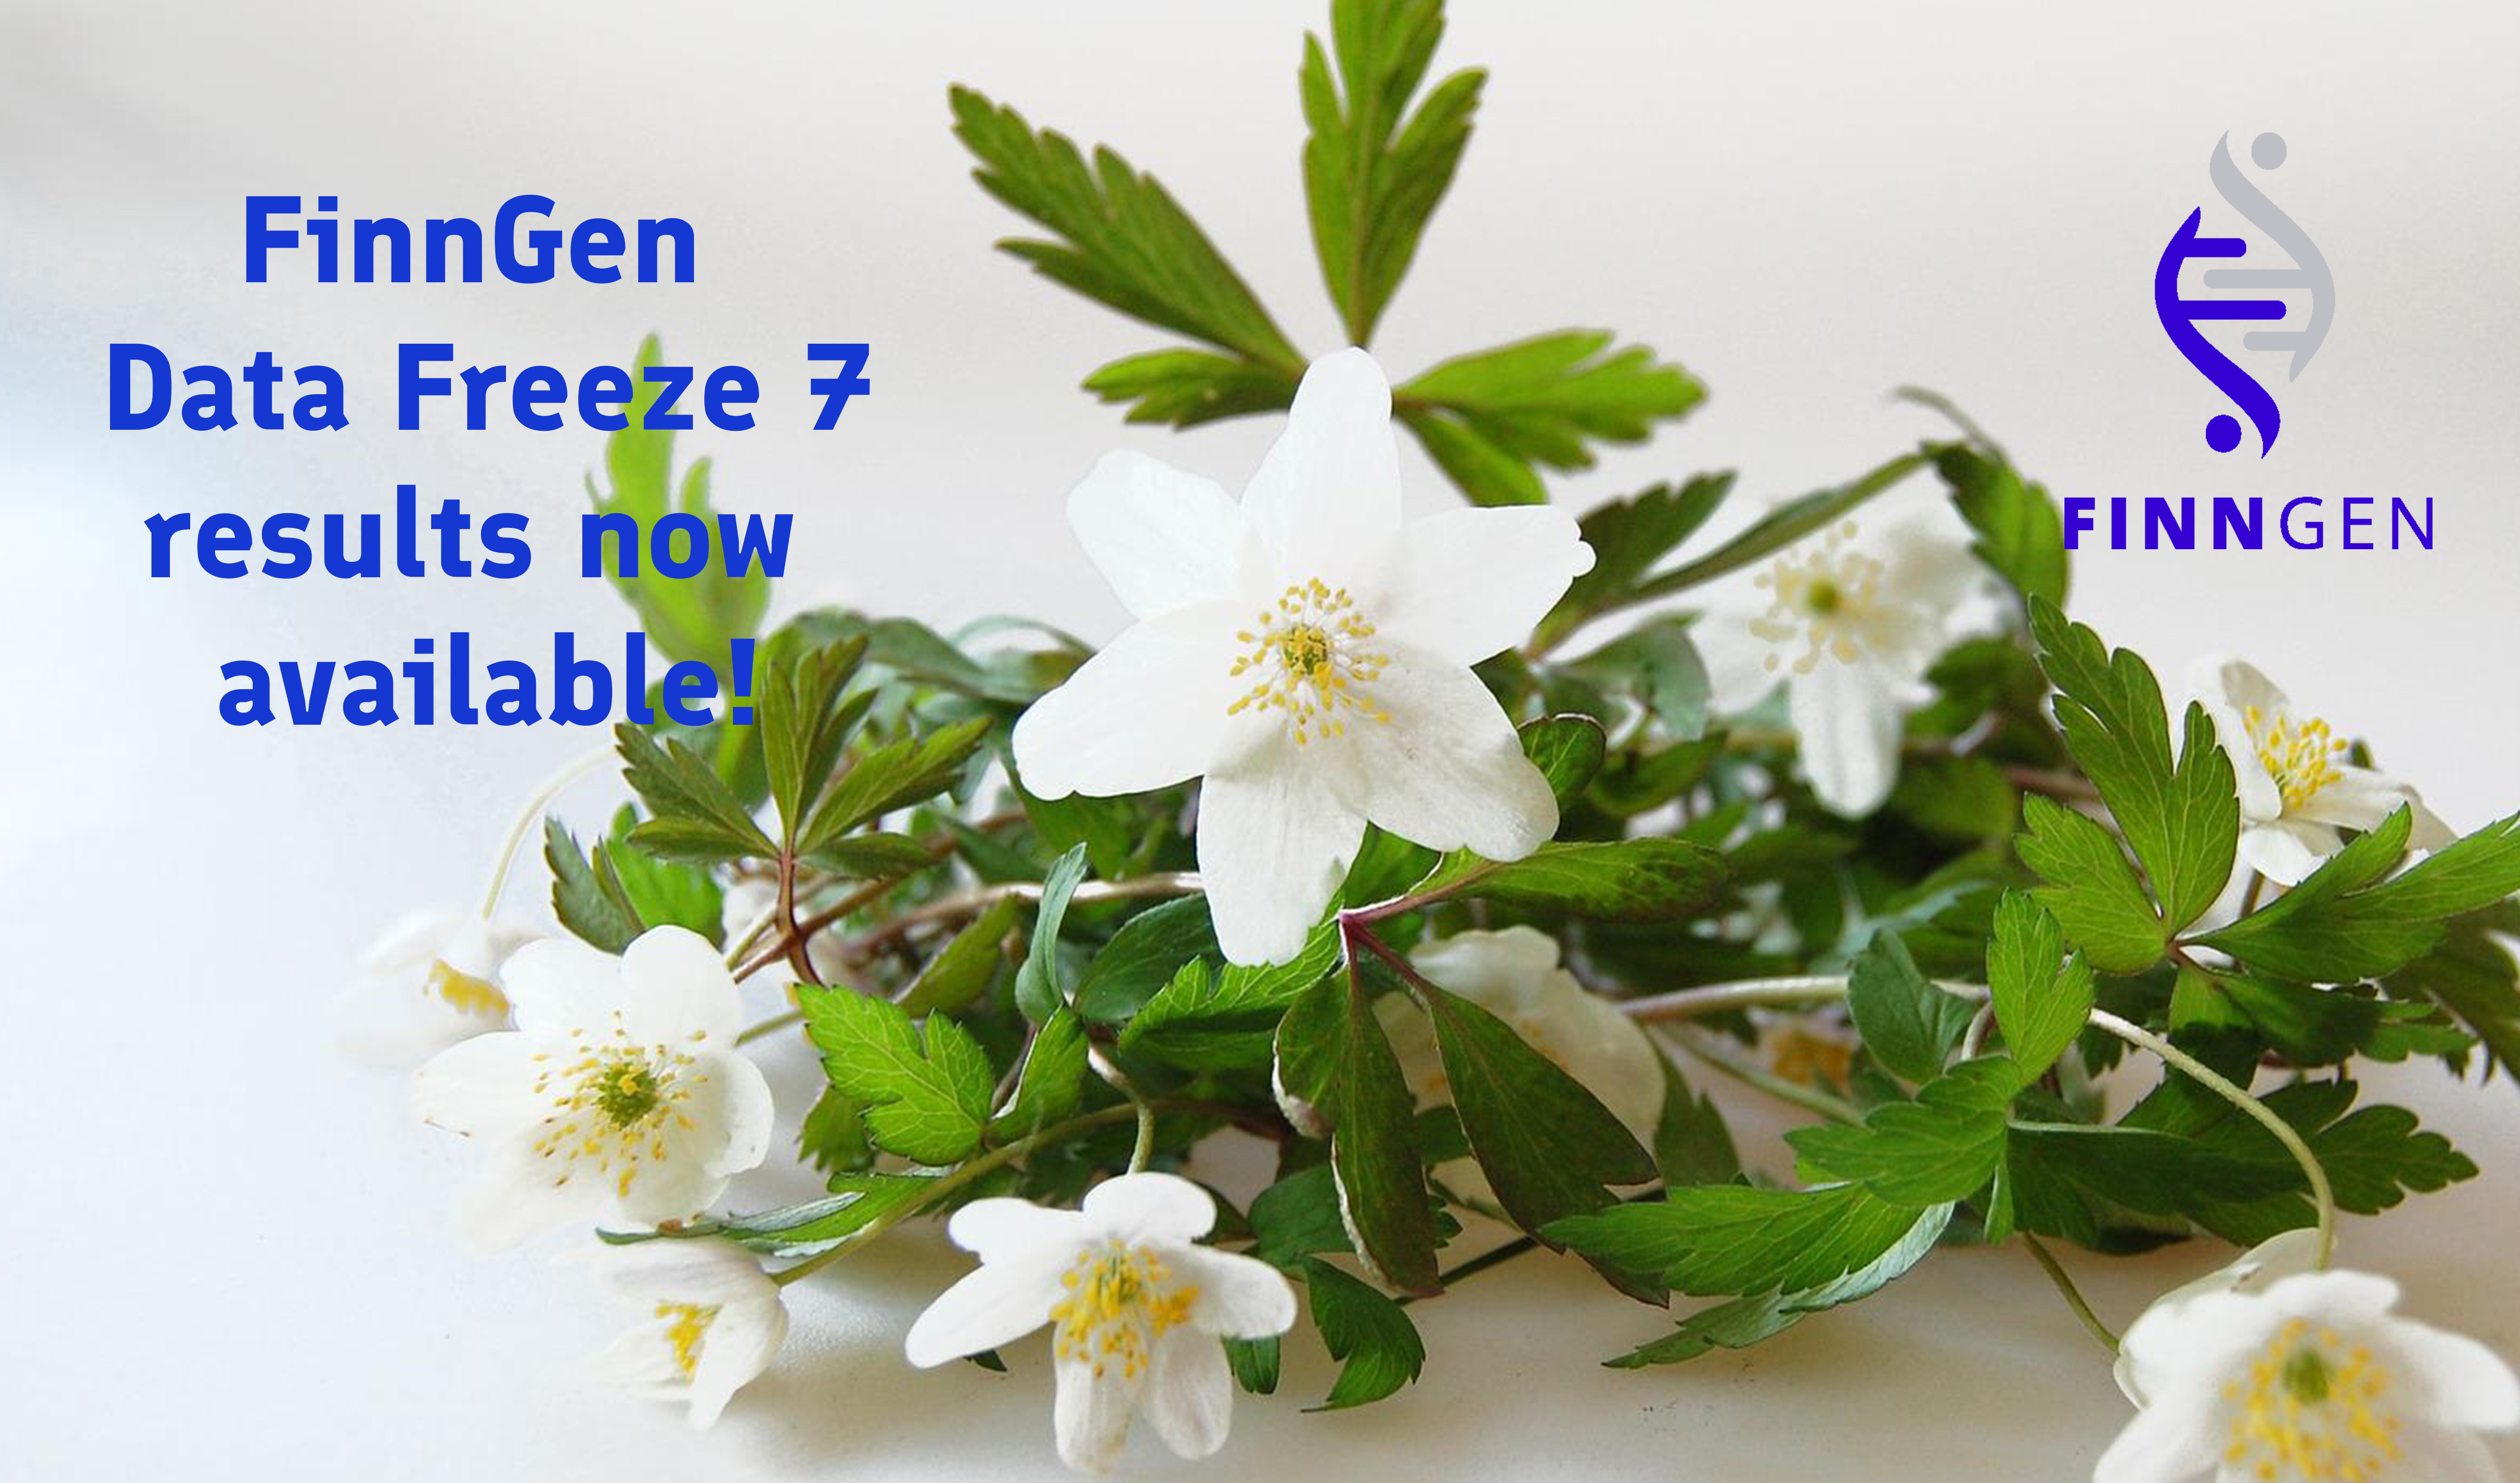 Wood anemones and the text: "FinnGen Data Freeze 7 results now available".